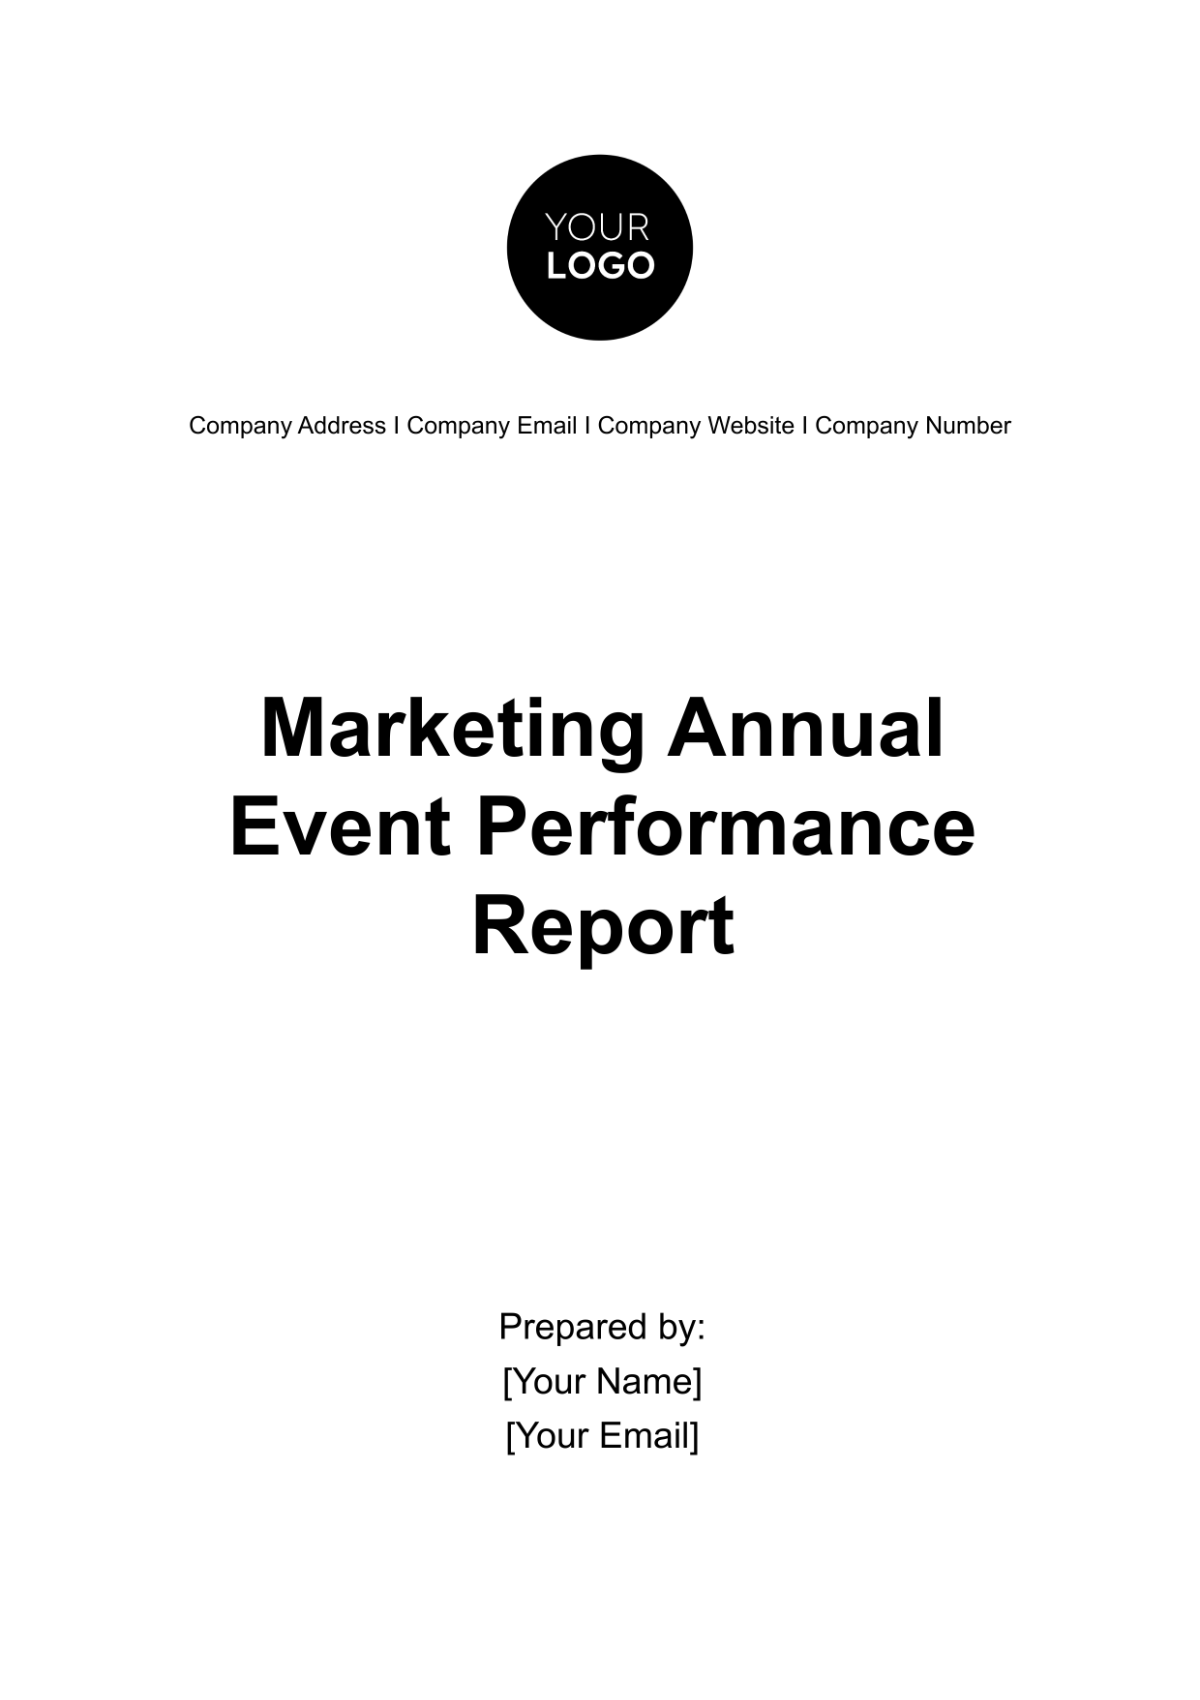 Free Marketing Annual Event Performance Report Template